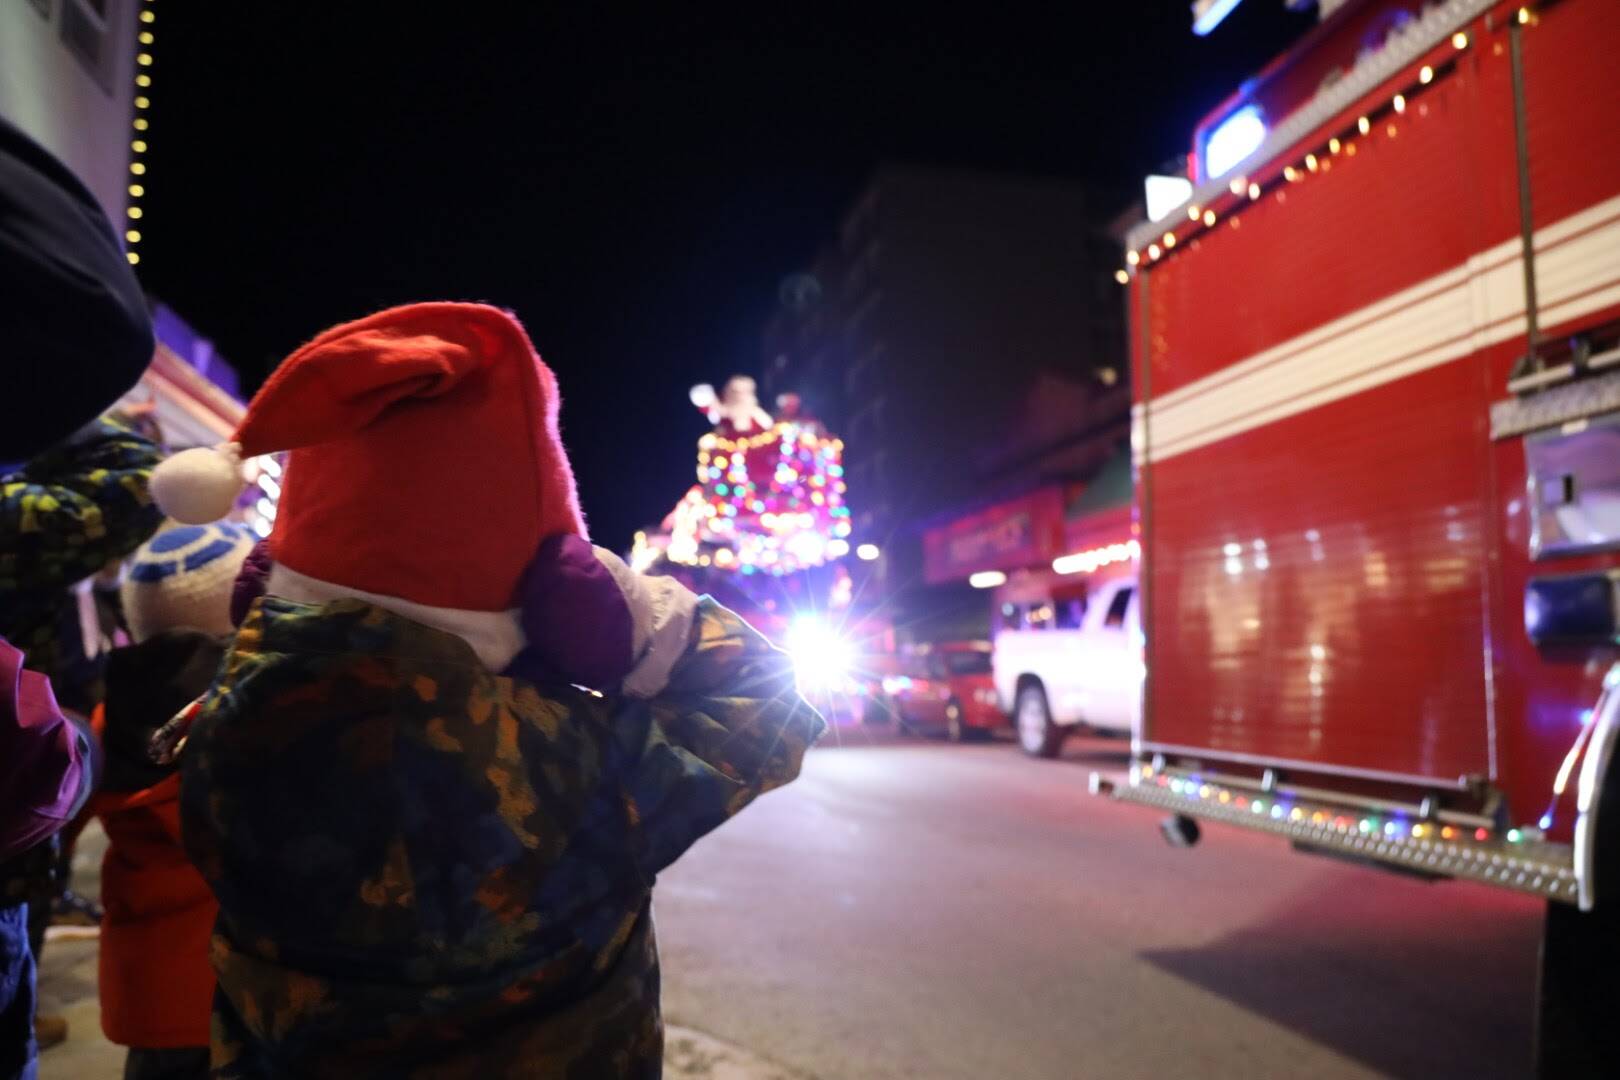 Callan Wilburn, 4, covers his ears with his mittens as the Capital City Fire/Rescue vehicles drive downtown for the Santa parade Saturday evening. (Clarise Larson / Juneau Empire)